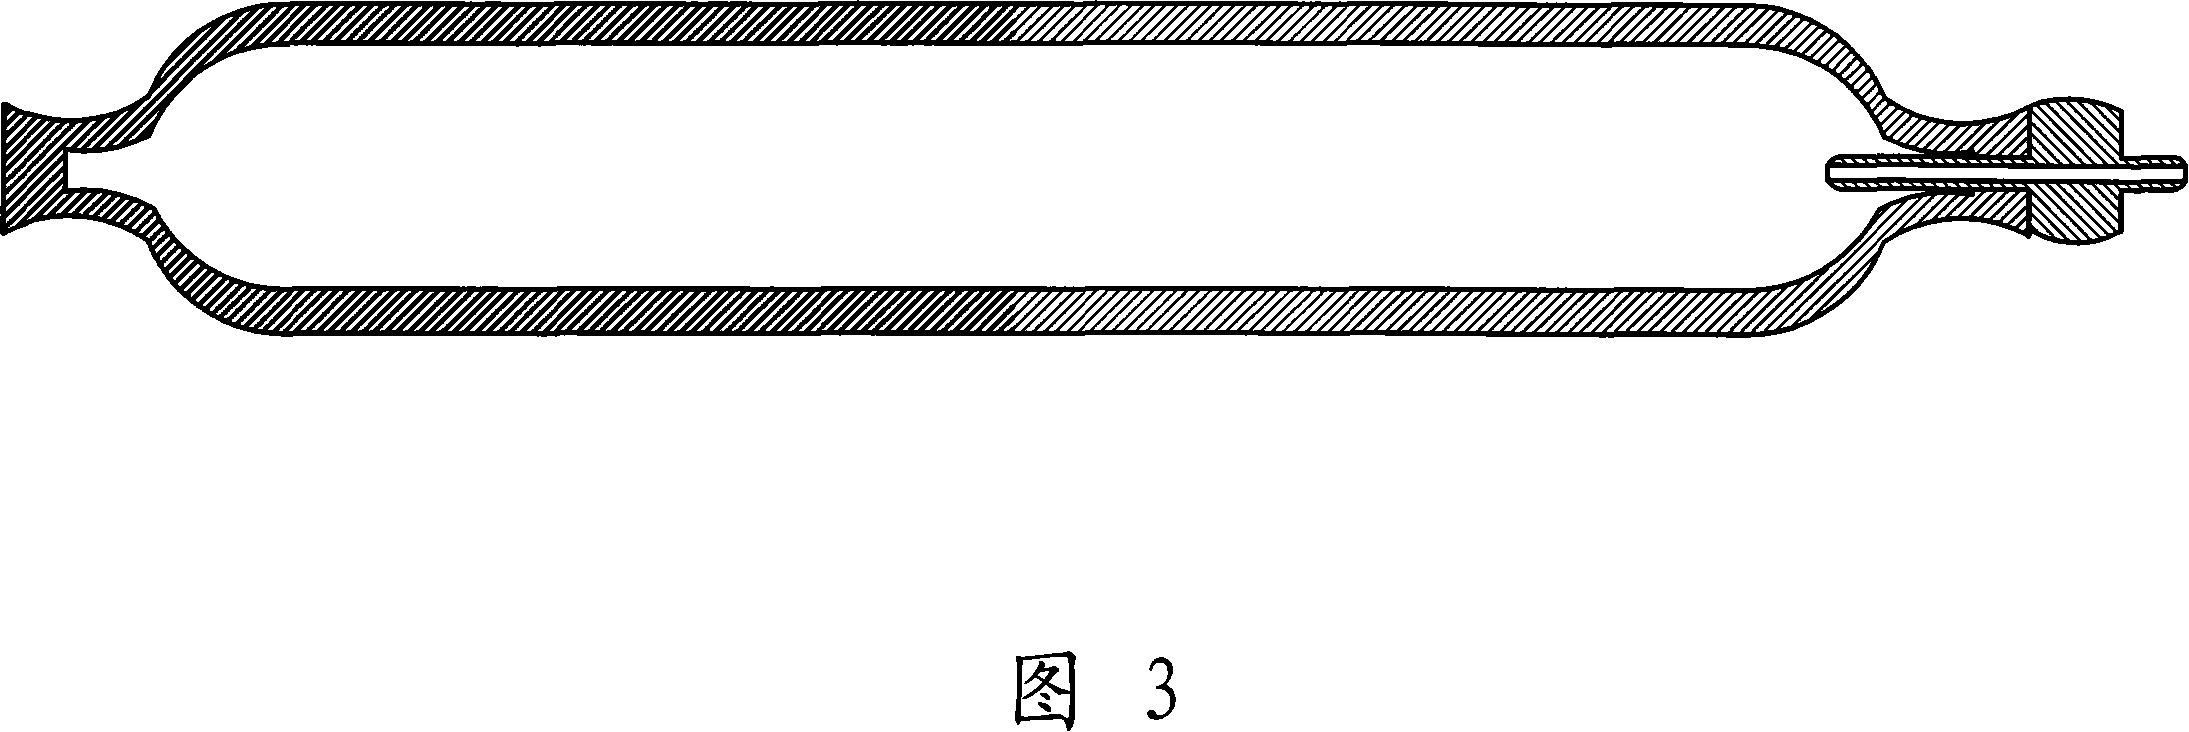 Mechanism for coating adhesive used for medical instrument assembling